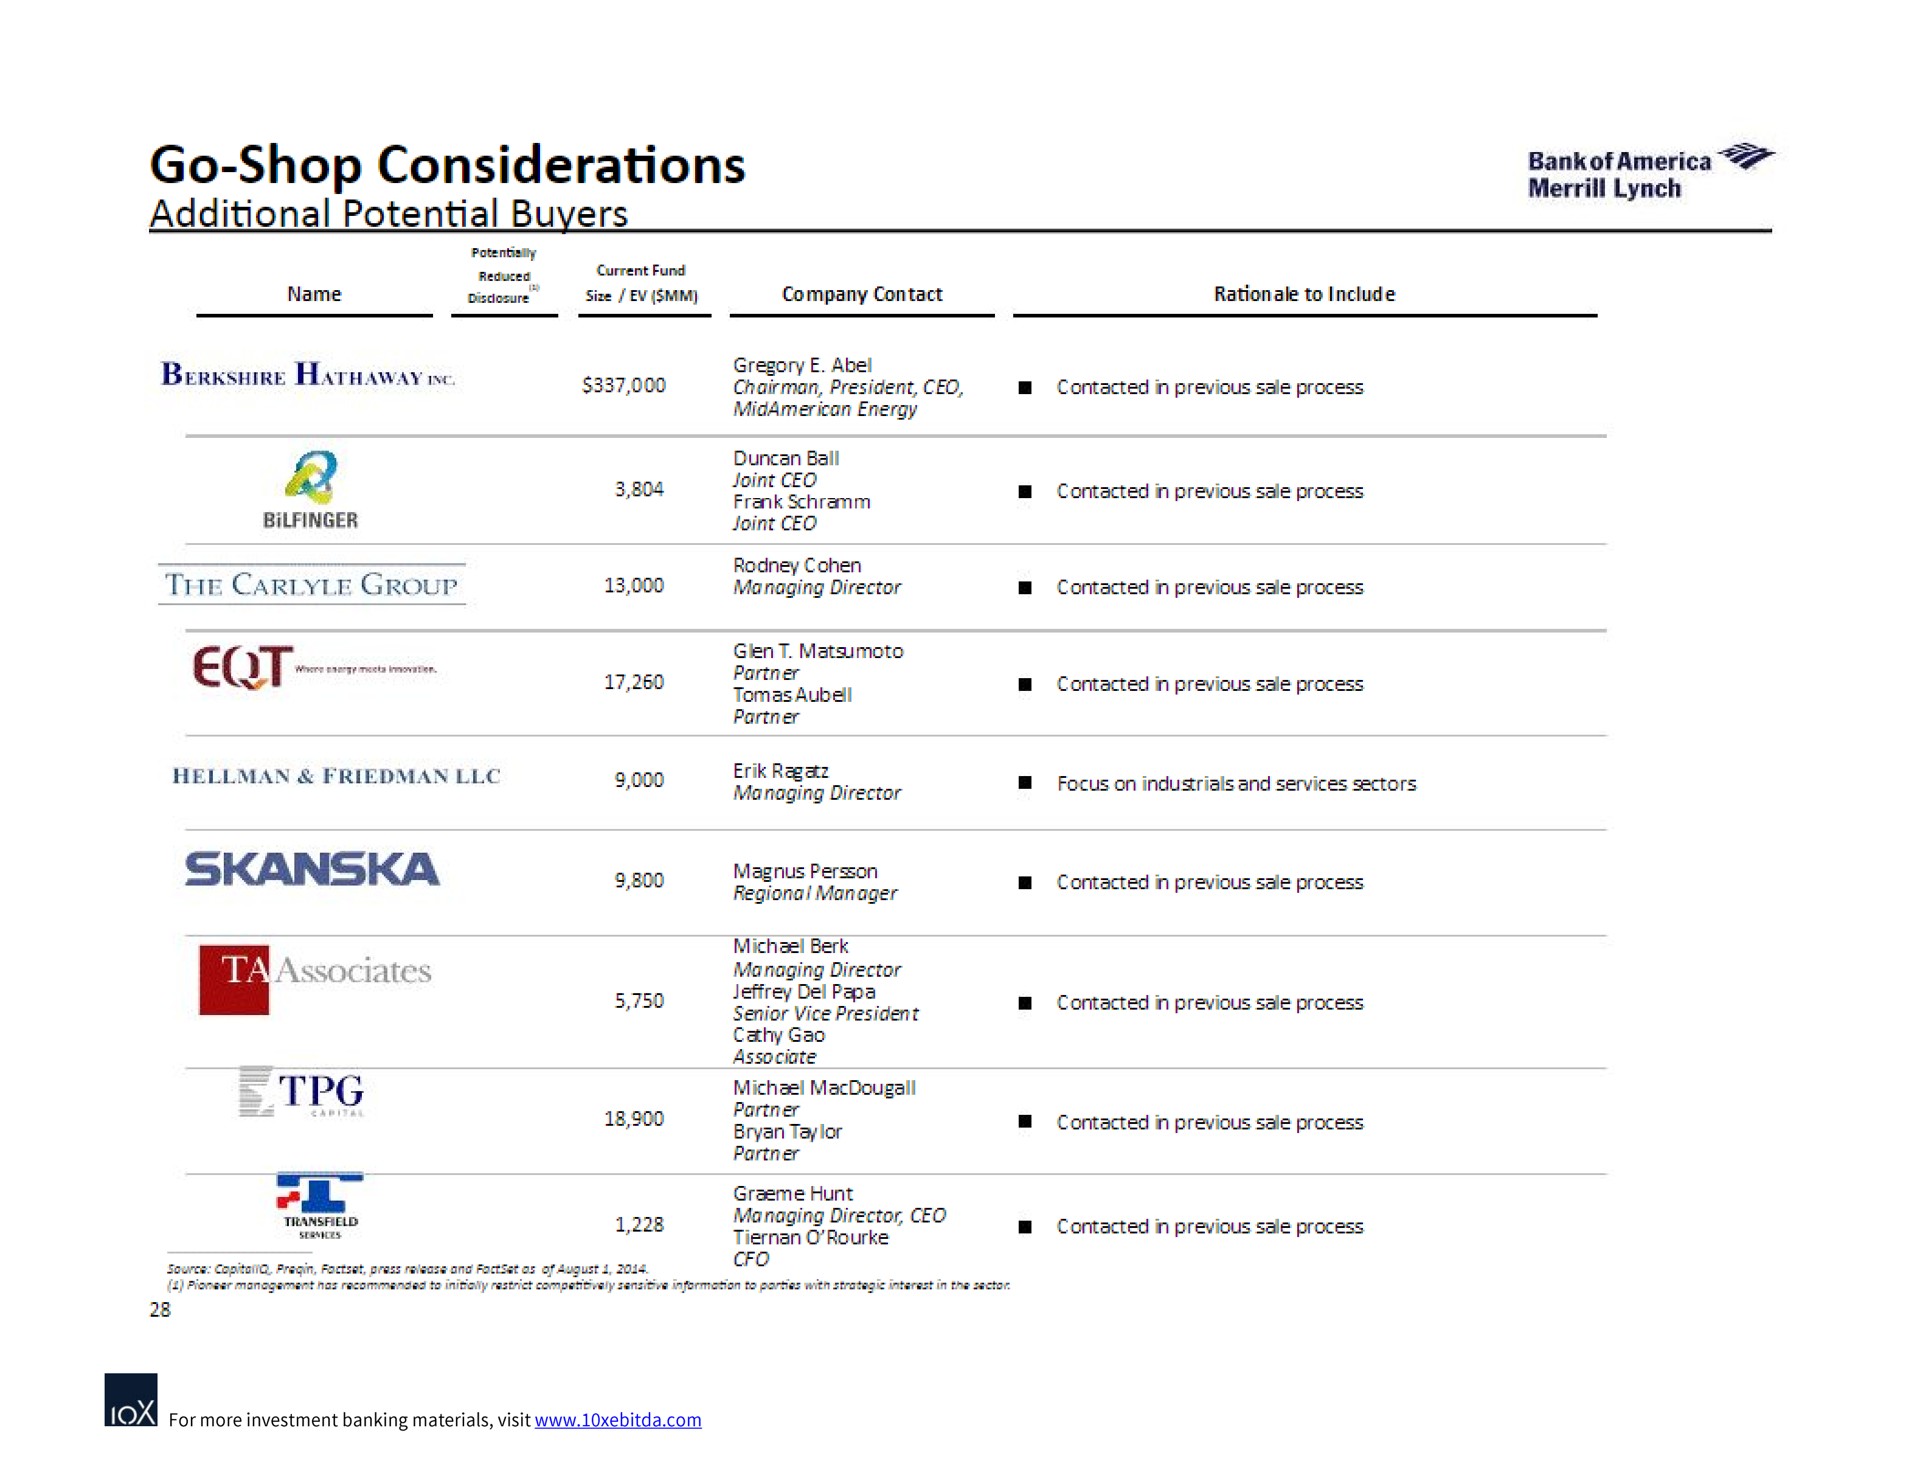 go shop considerations additional potential buyers | Bank of America